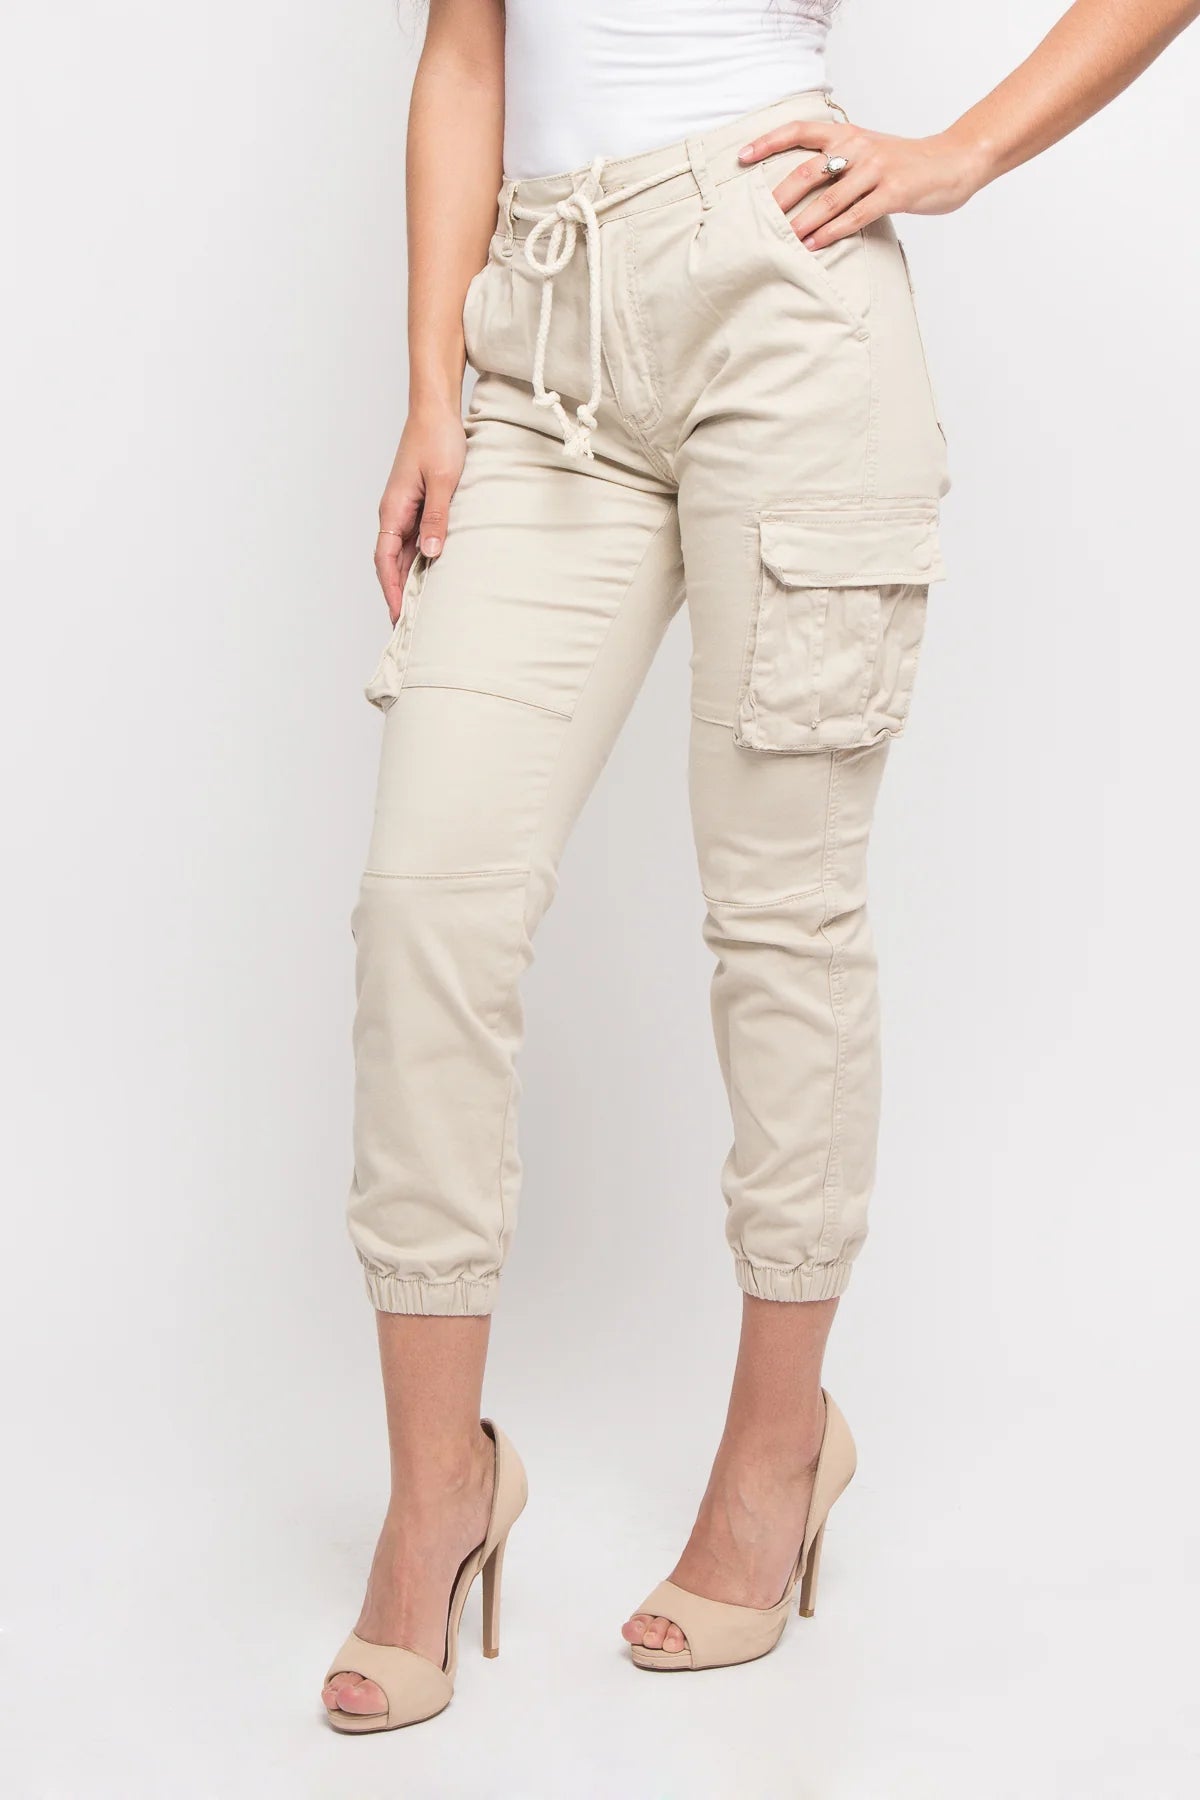 Women's Essential Basic Cropped Colored Cargo Joggers - Ivory